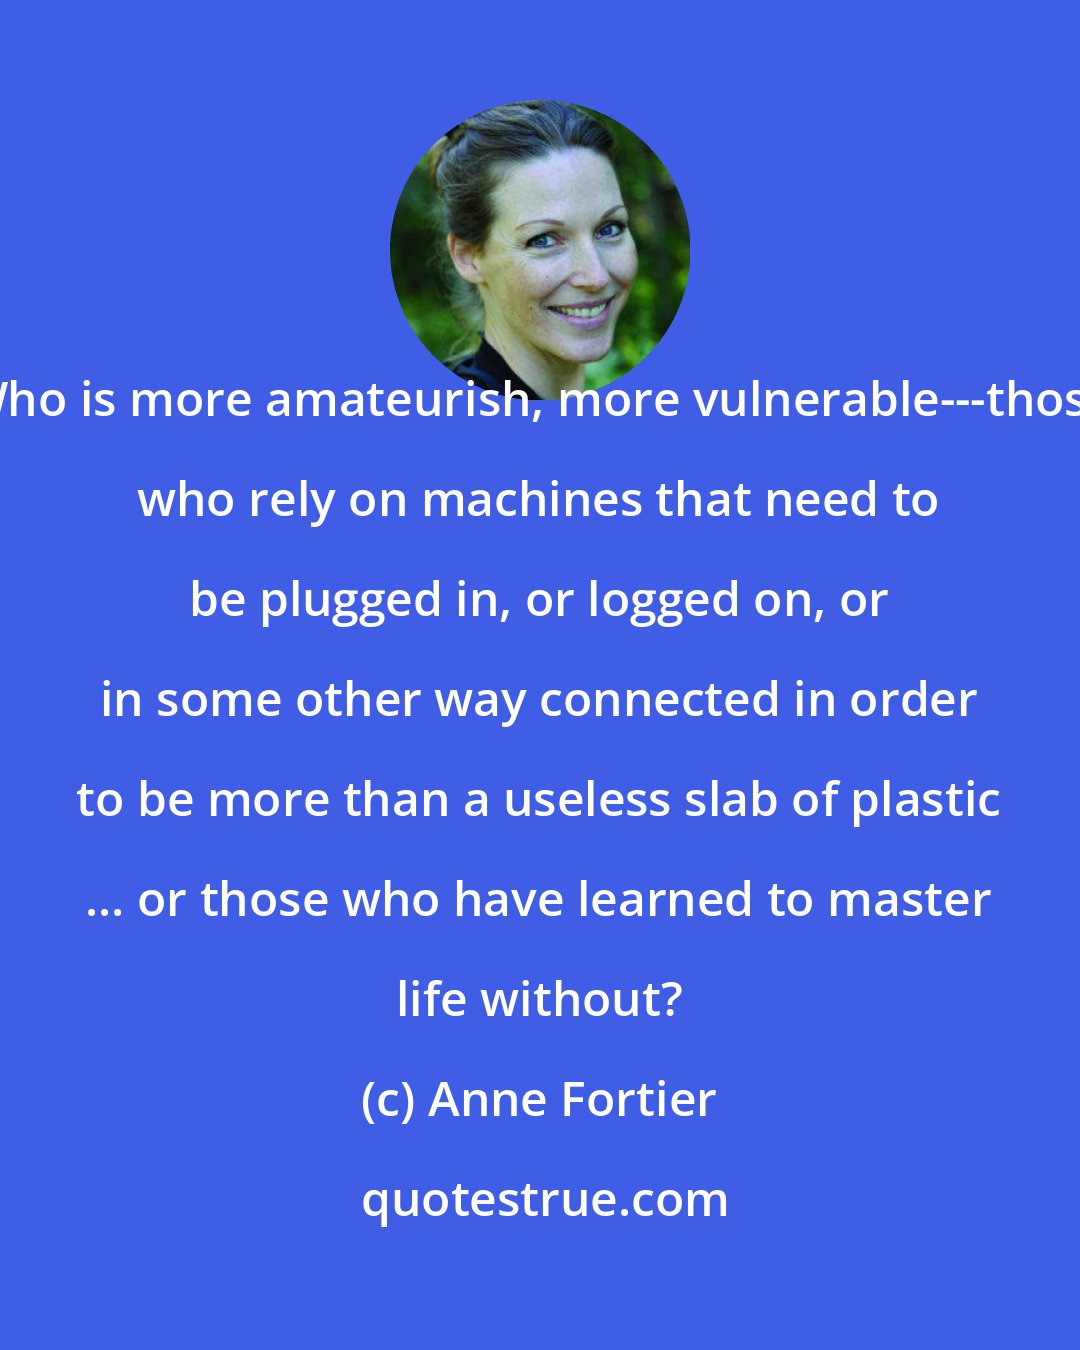 Anne Fortier: Who is more amateurish, more vulnerable---those who rely on machines that need to be plugged in, or logged on, or in some other way connected in order to be more than a useless slab of plastic ... or those who have learned to master life without?